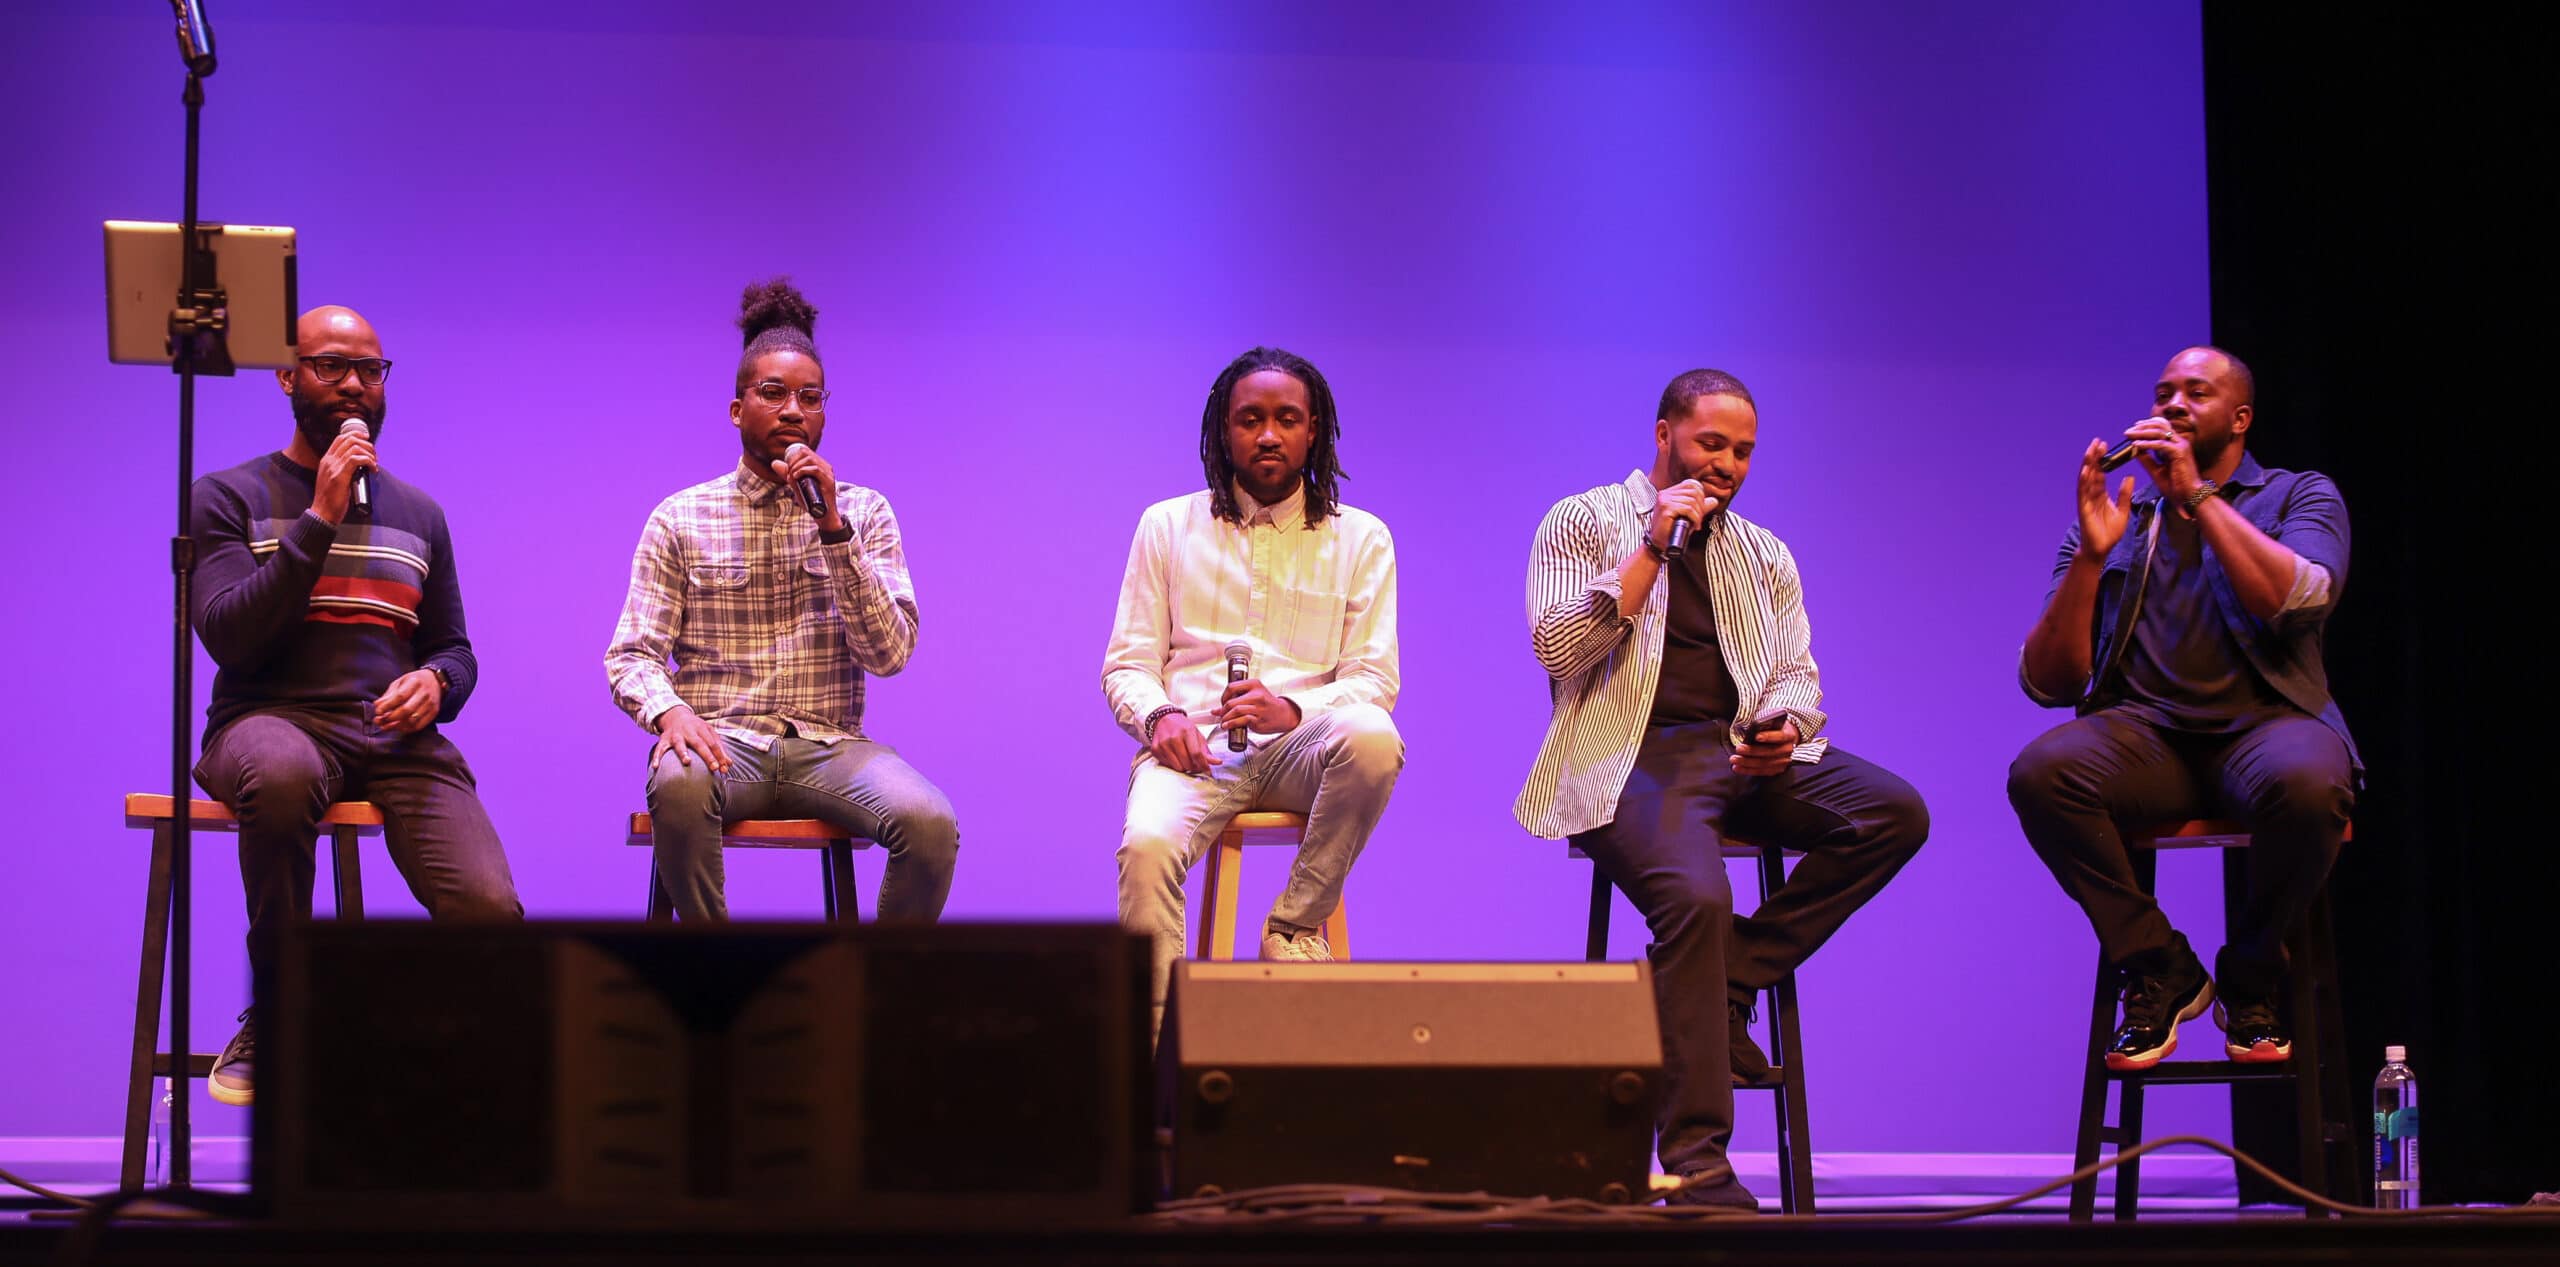 5 men sitting on stools while singing. Members of Committed (left to right): Maurice Staple, Brent Hoyle, Theron “Therry” Thomas, Robbie Pressley, and Dennis “DJ” Baptiste Jr.